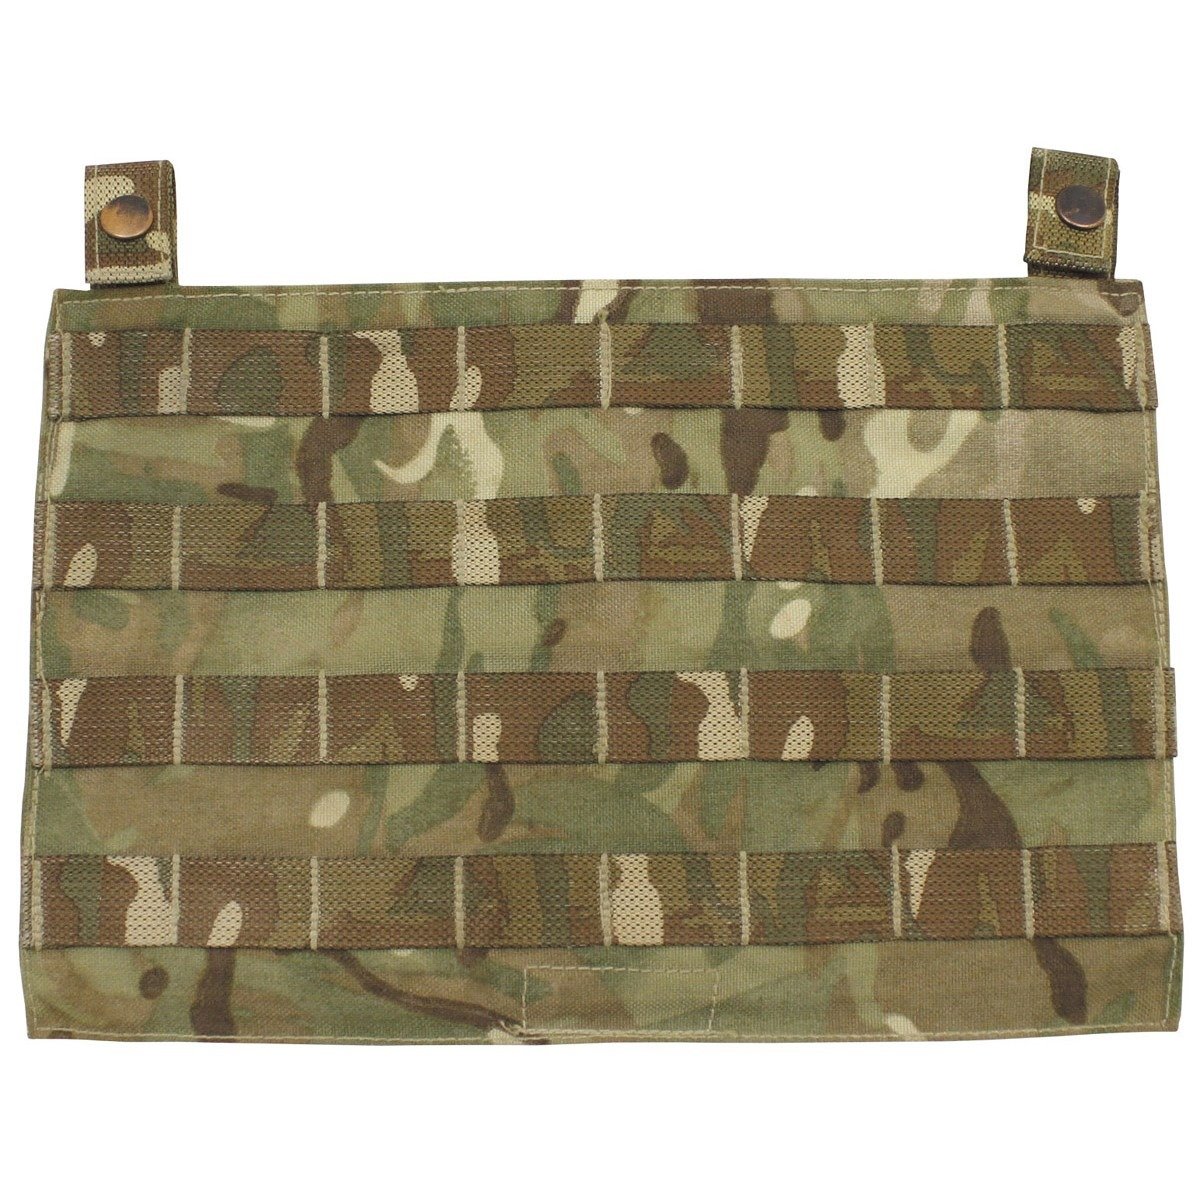 OPS Osprey MK IV Molle panel - Military Surplus from the British Army ...